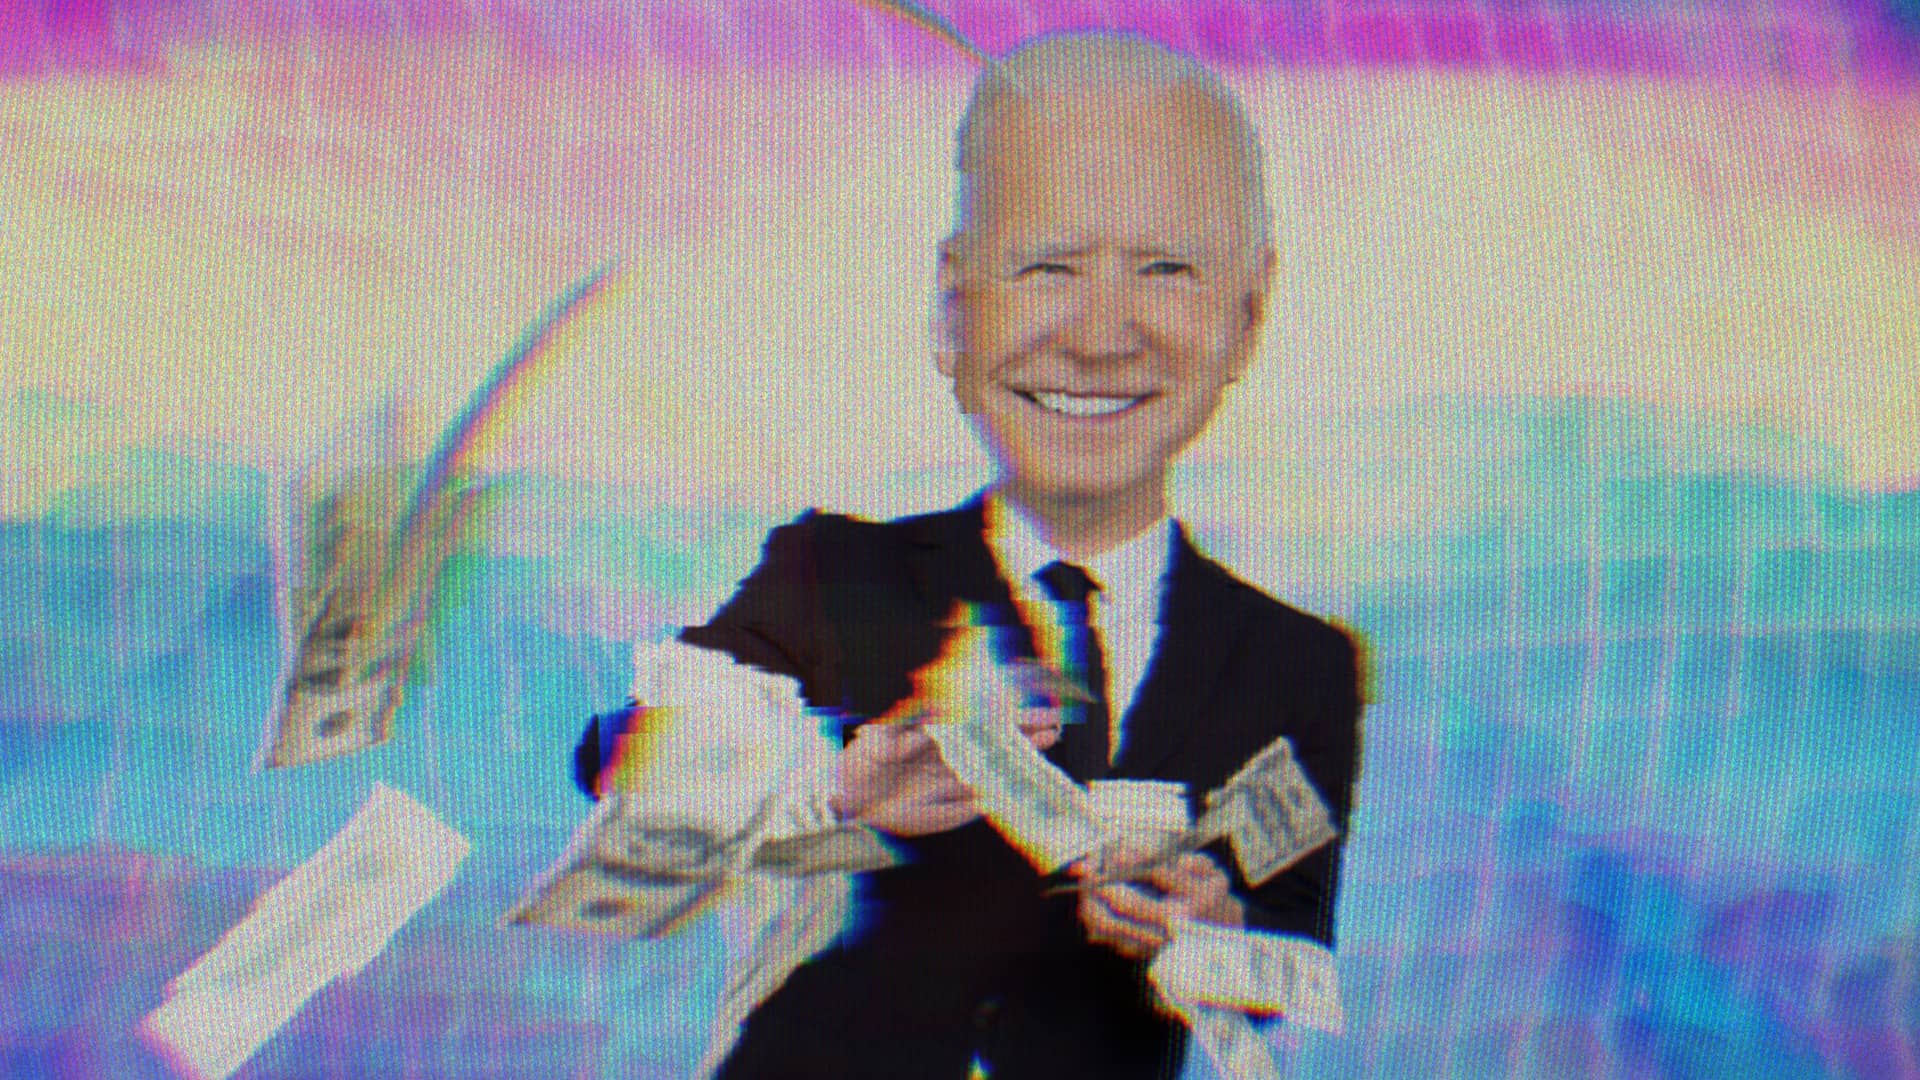 Joe Biden smiling and making it rain with a stack of cash